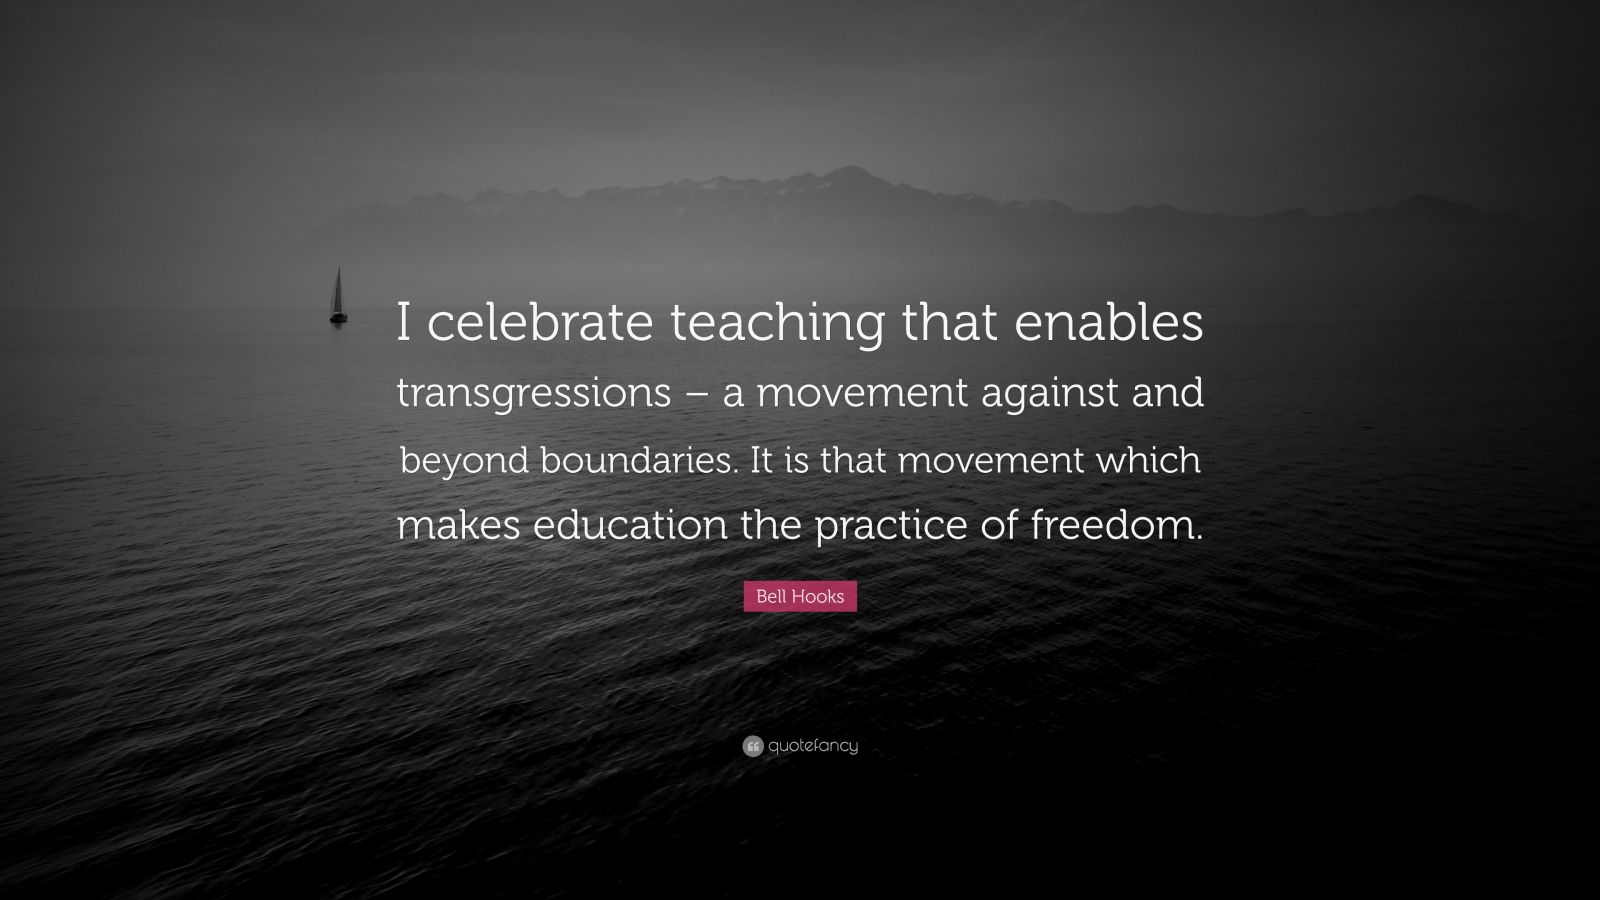 bell hooks education as the practice of freedom